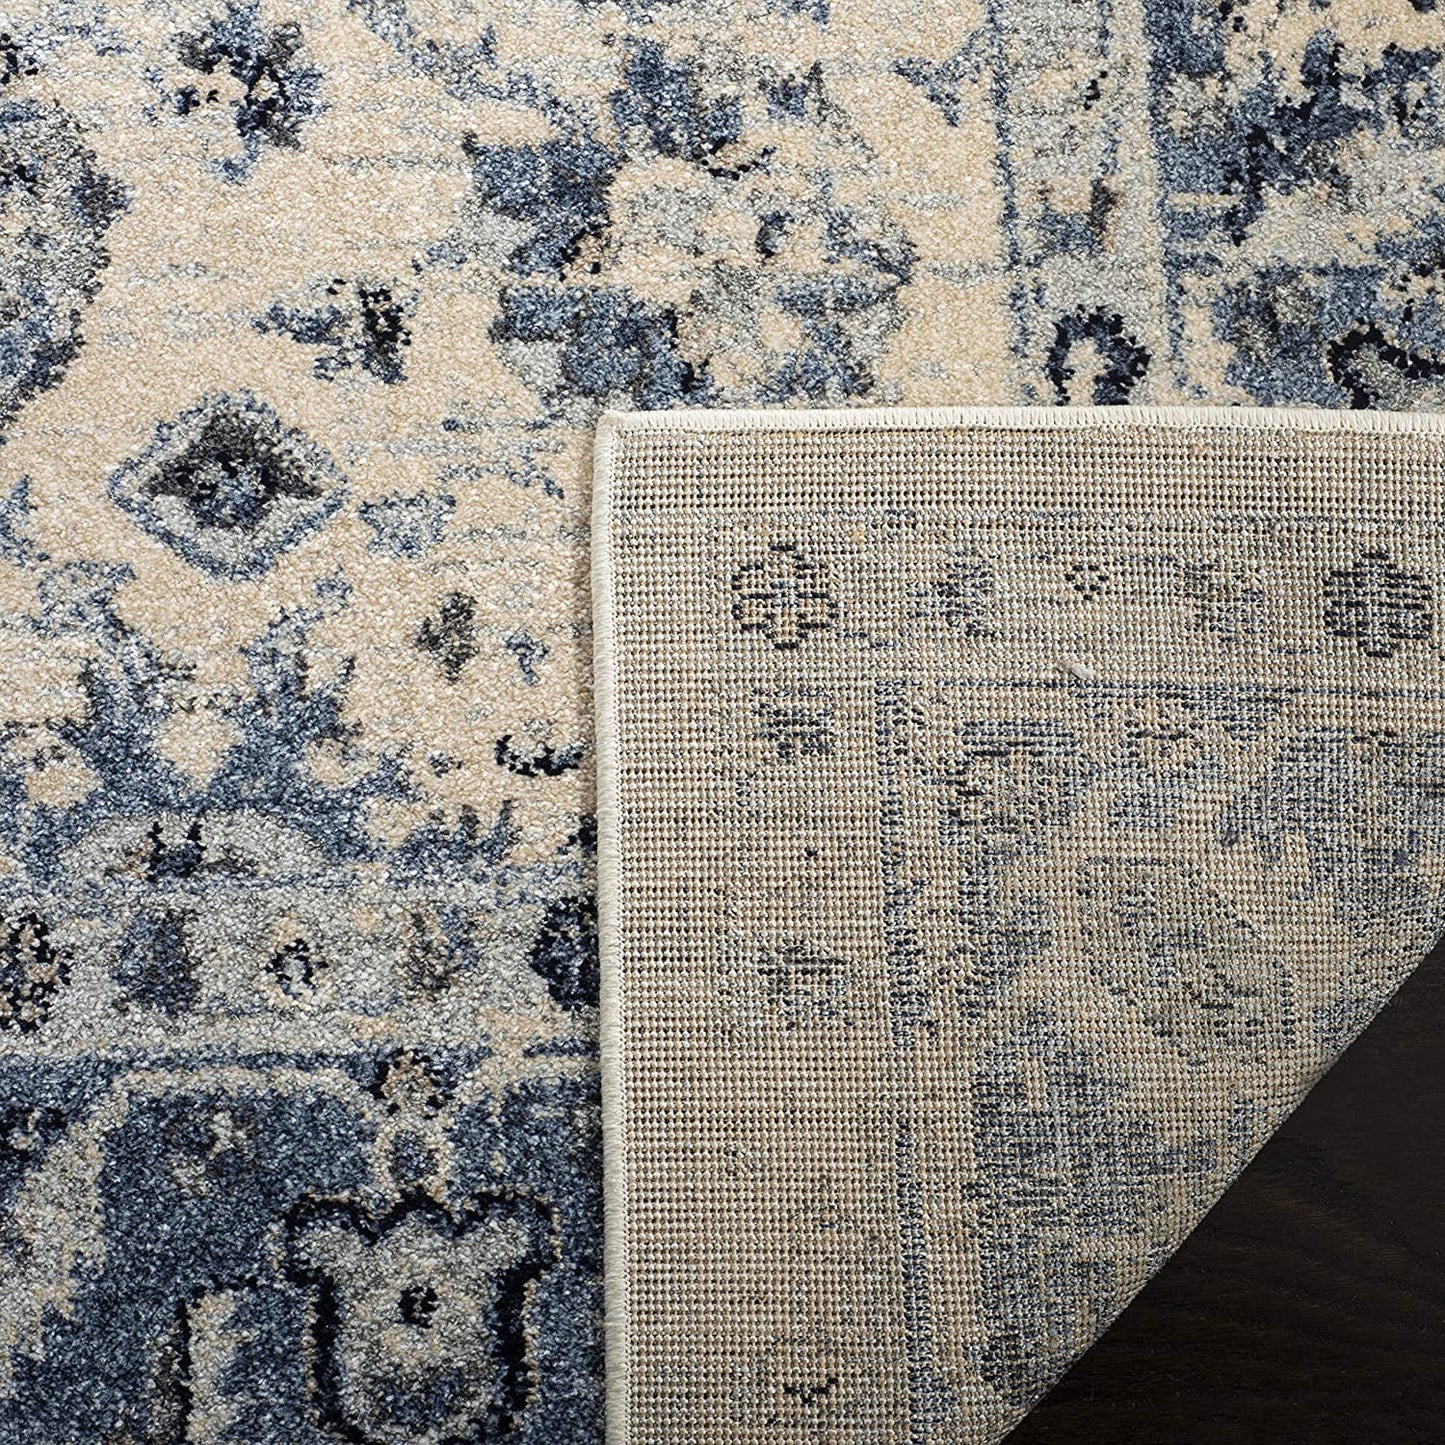 Charleston Collection Oriental Distressed Area Rug